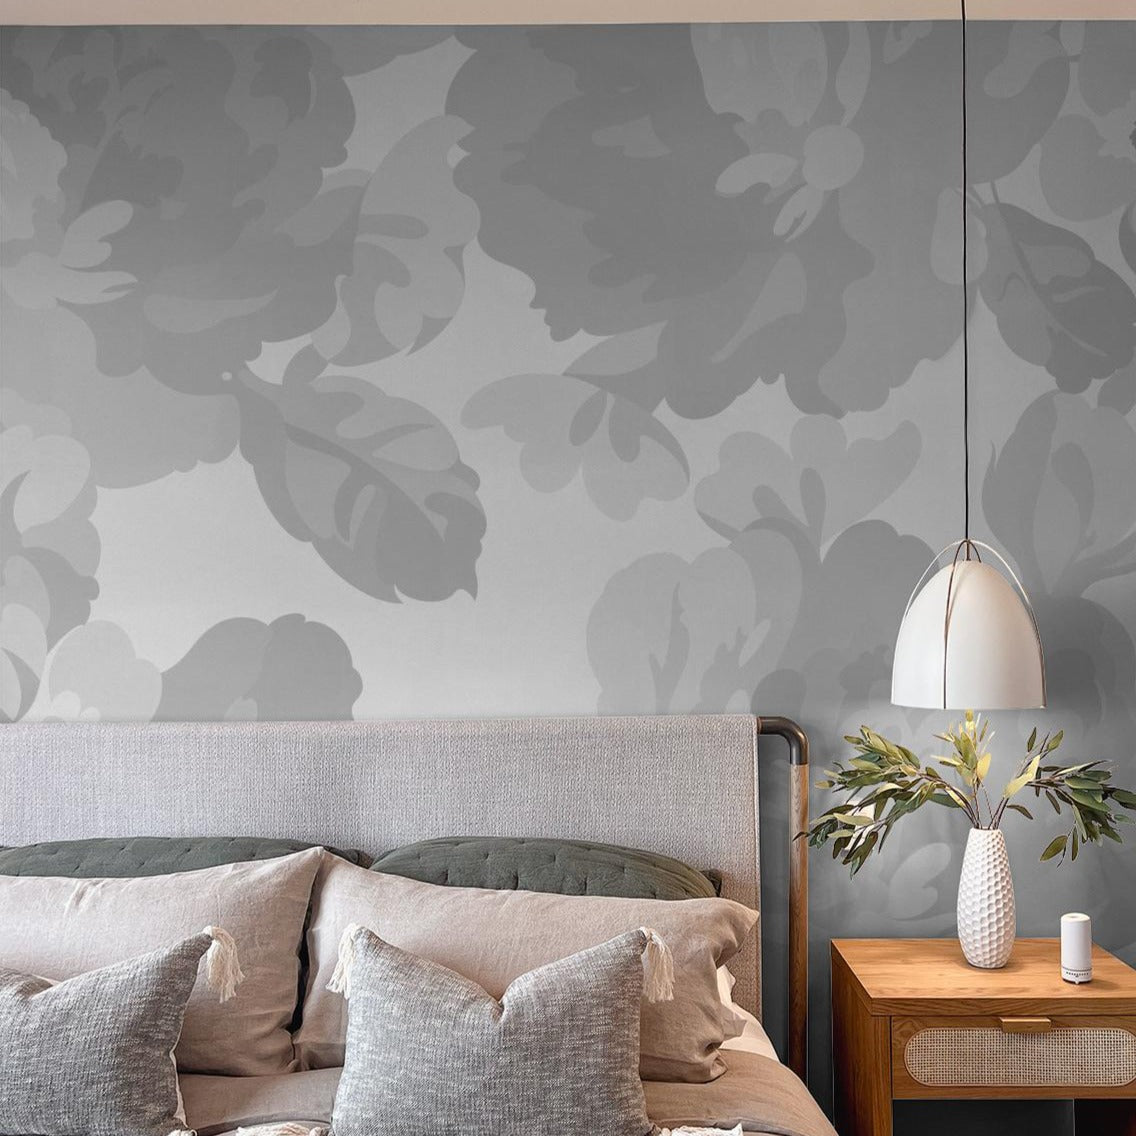 "Terra Bloom (Gray) Wallpaper by Wall Blush in a modern bedroom, with focus on elegant botanical design."